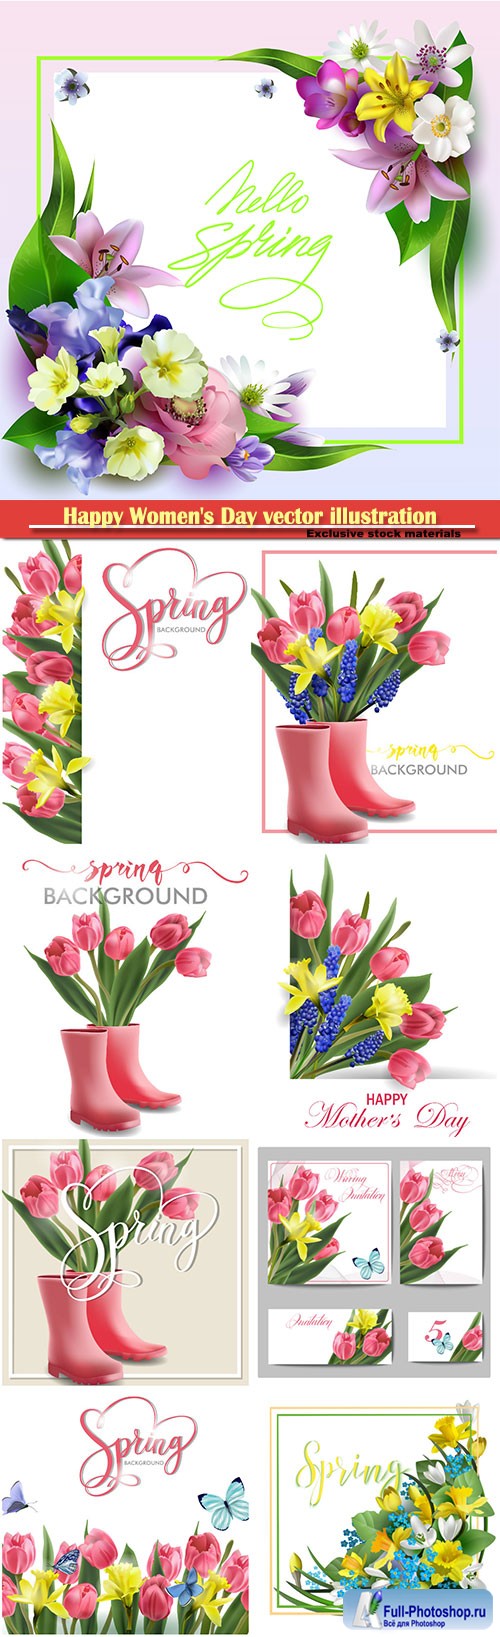 Happy Women's Day vector illustration,8 March, spring flower background # 10